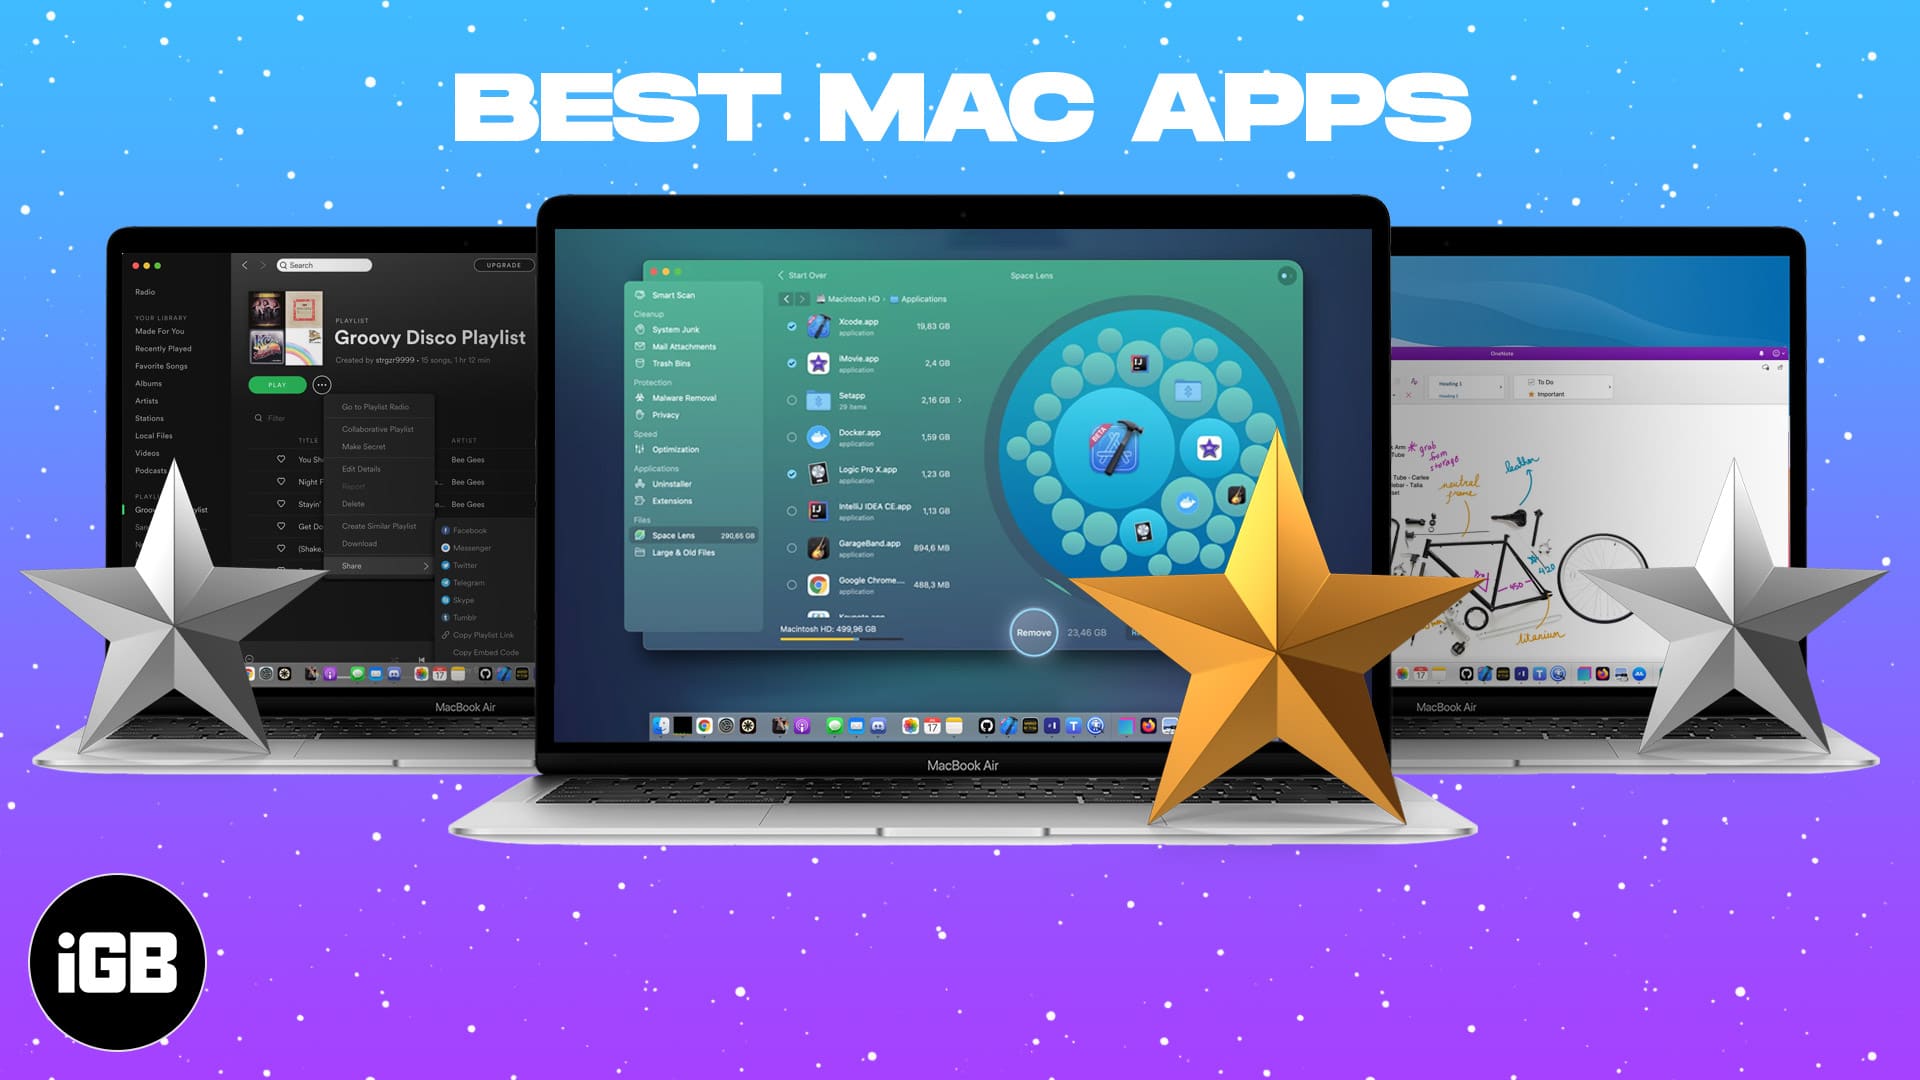 rate the best mac cleaner free download